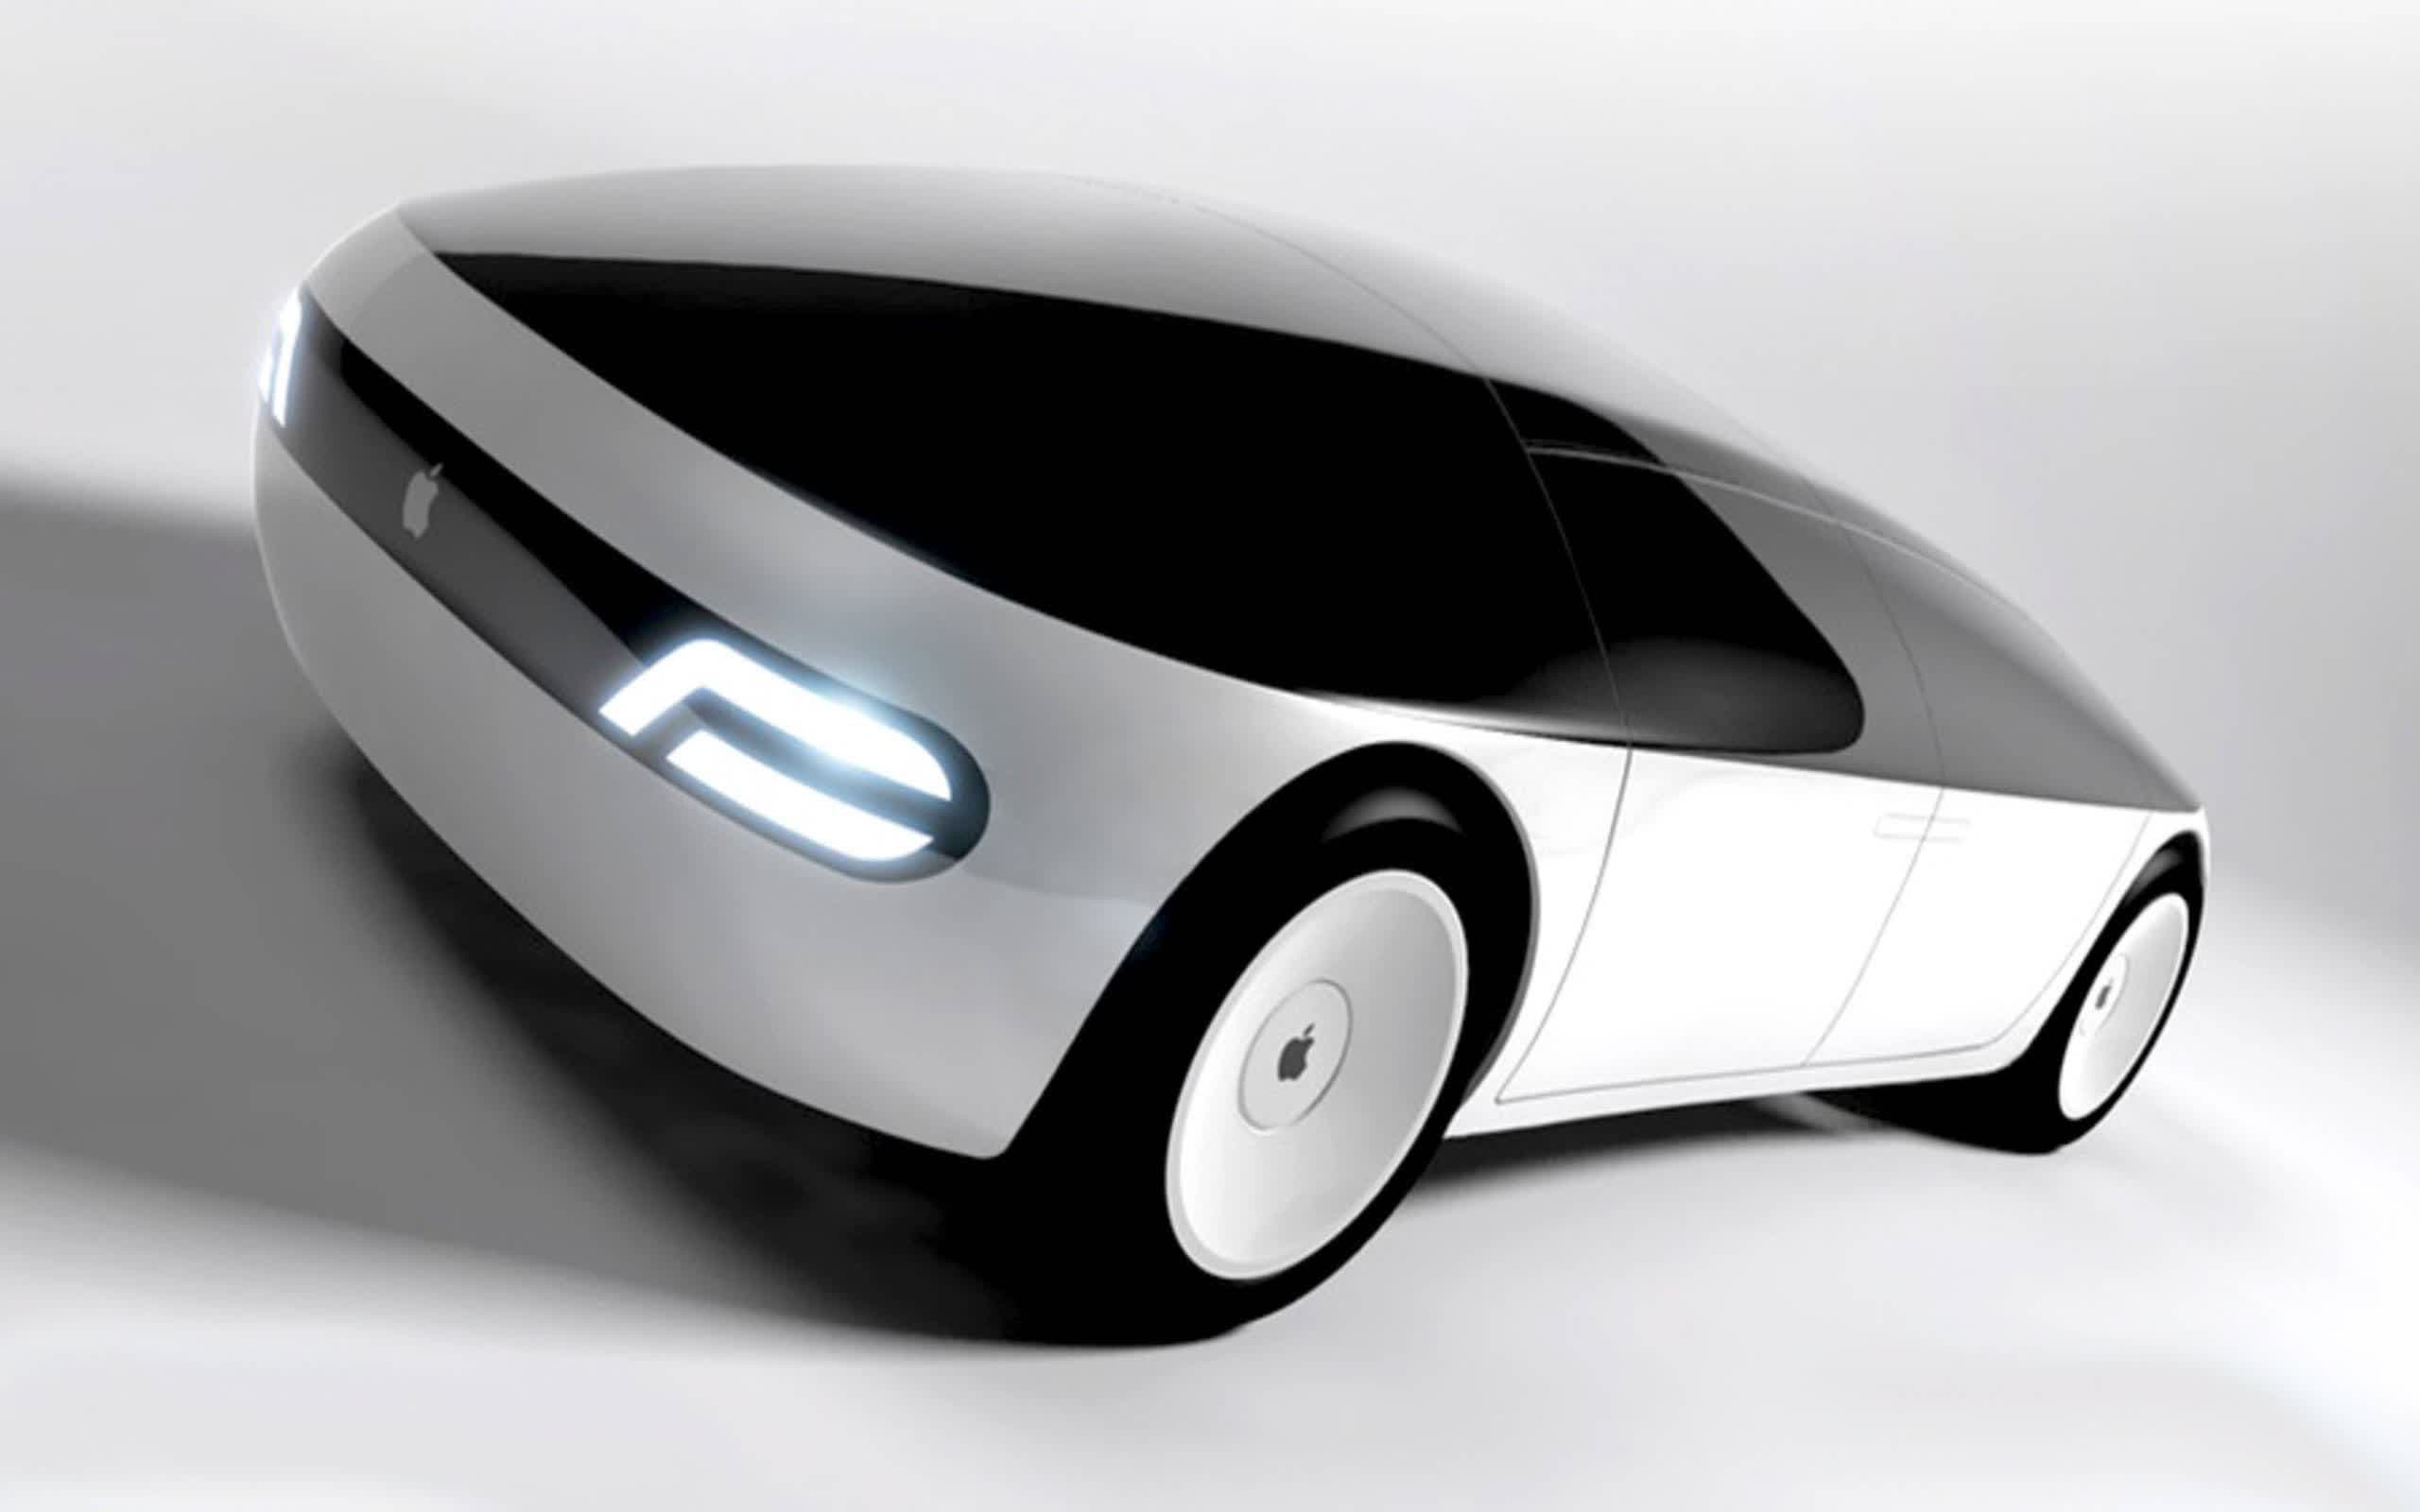 'Apple Car' will reportedly make its debut in Q3 2021, years ahead of schedule